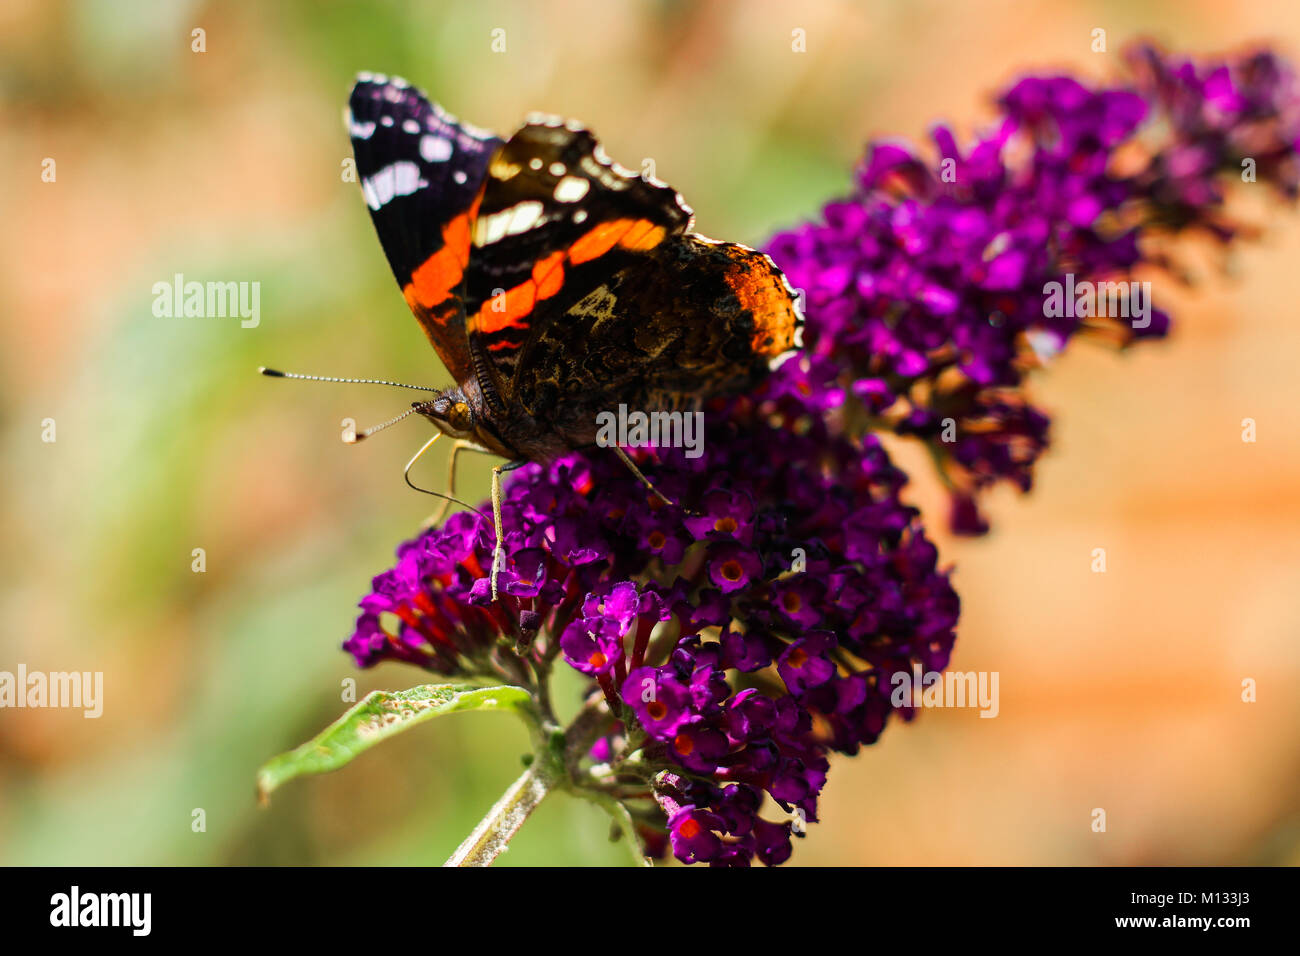 Close-up of Tortoiseshell Butterfly collecting nectar on Butterfly Bush - Common UK Butterfly collecting nectar from a purple Buddleia Davidii flower Stock Photo